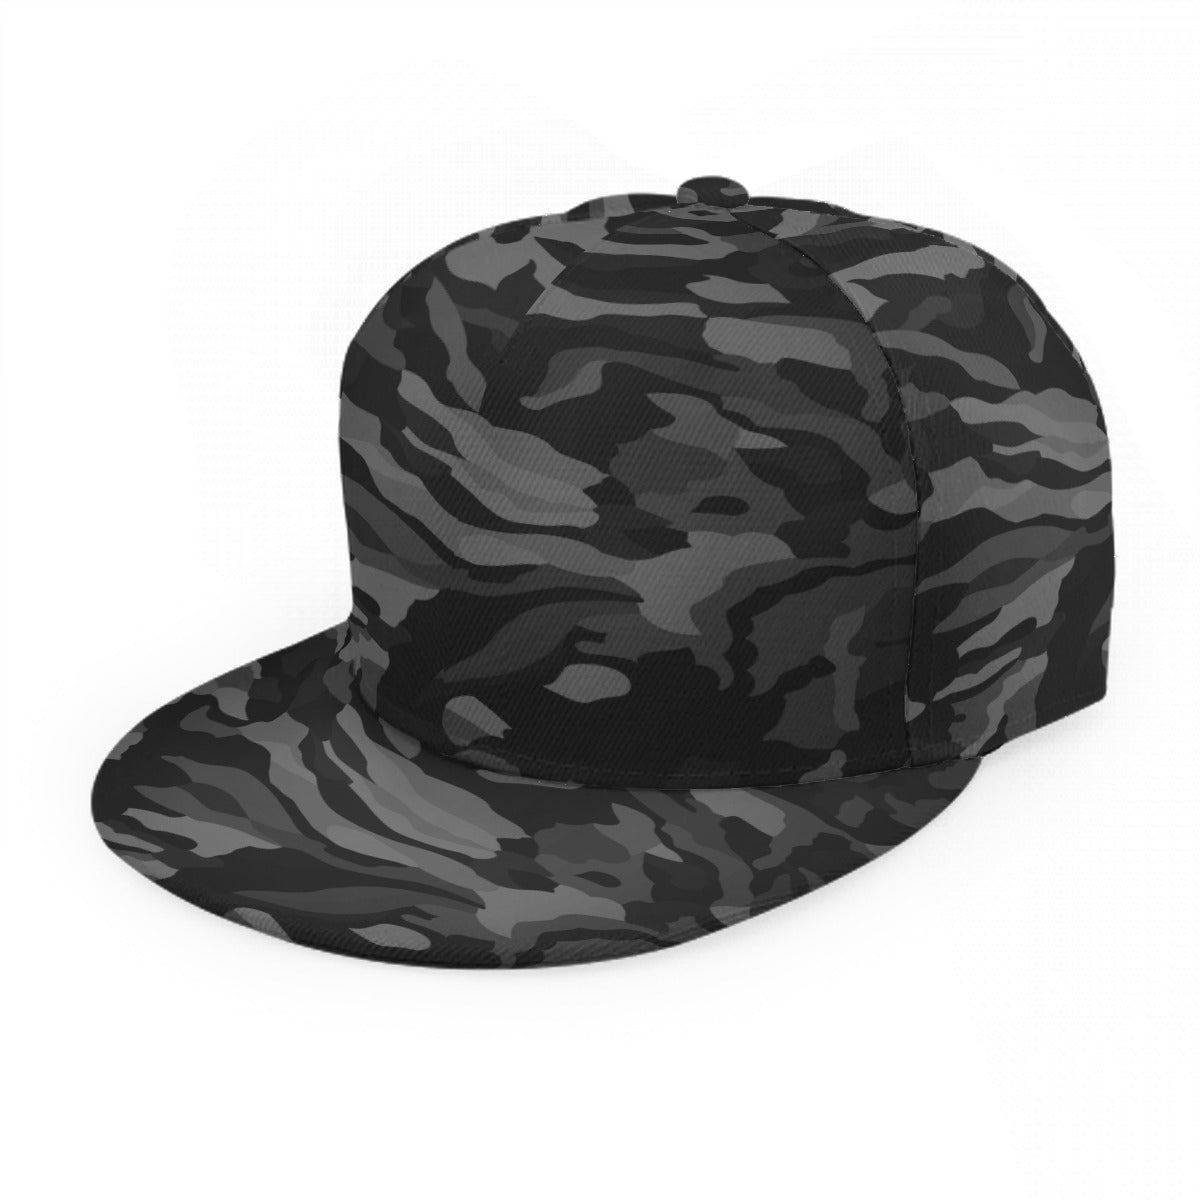 BLK Camouflaged Baseball Cap With Flat Brim